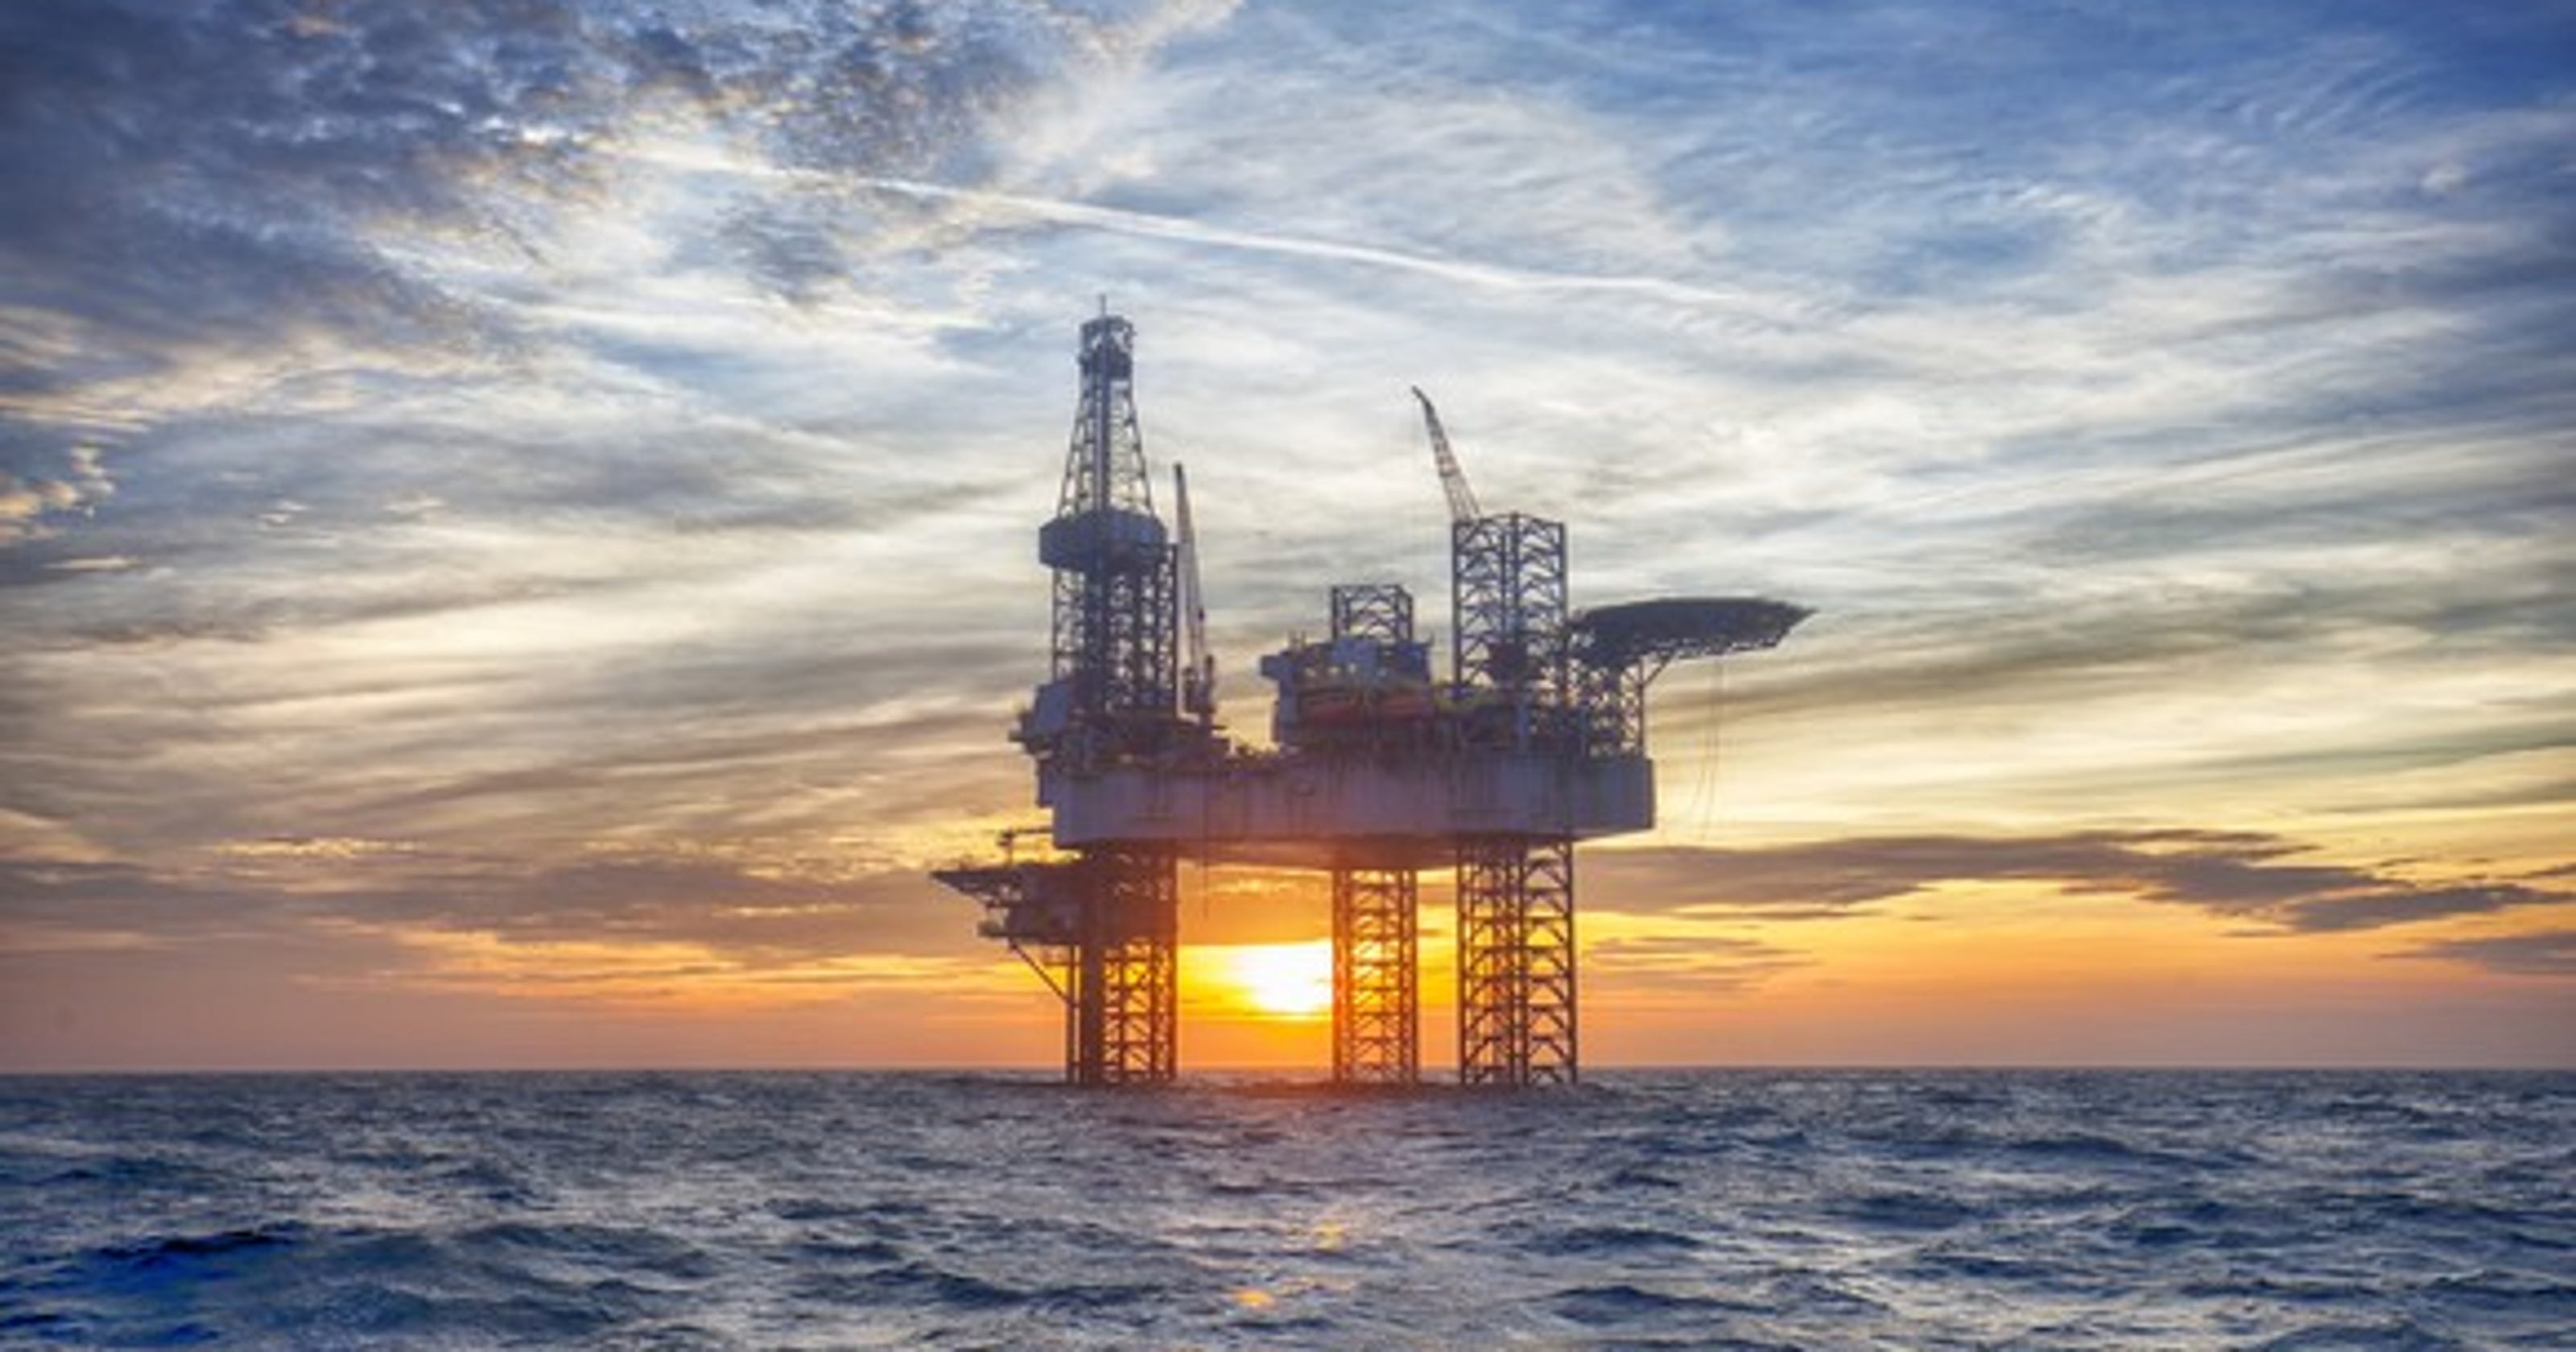 Ease Offshore Drilling Rules No Another View